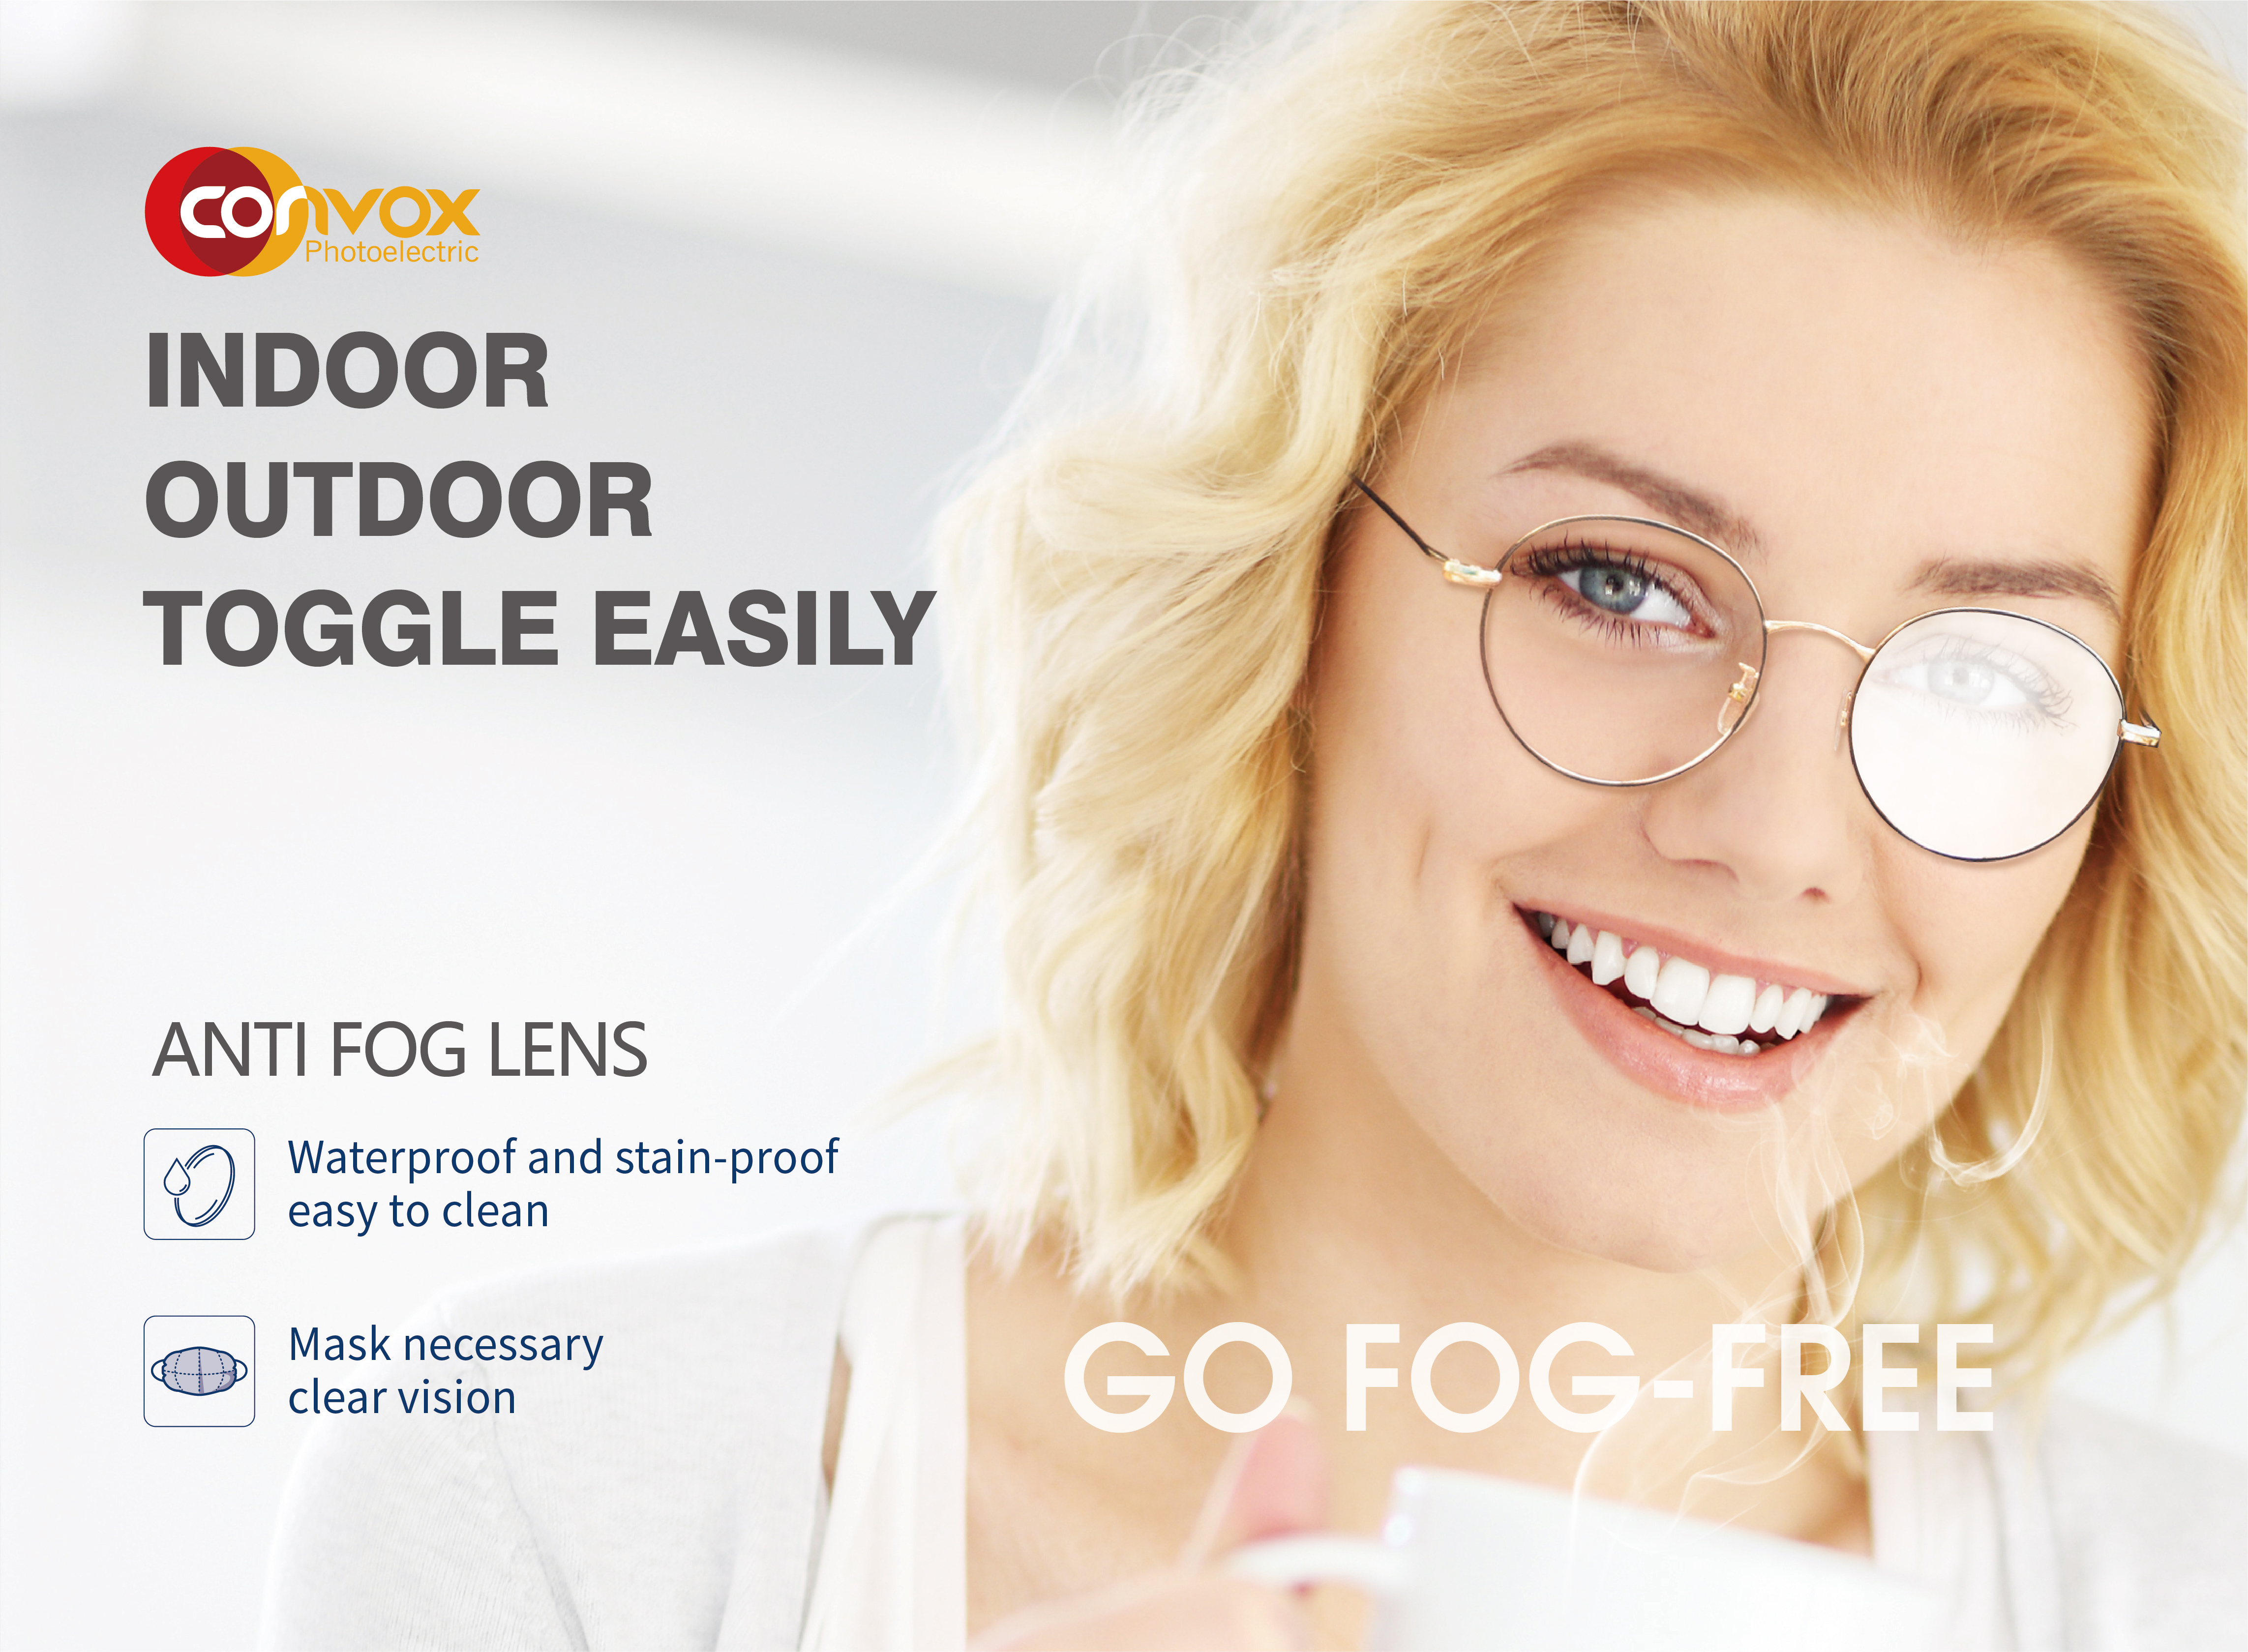 DON’T LET THE FOG BLOCK YOUR SIGHT